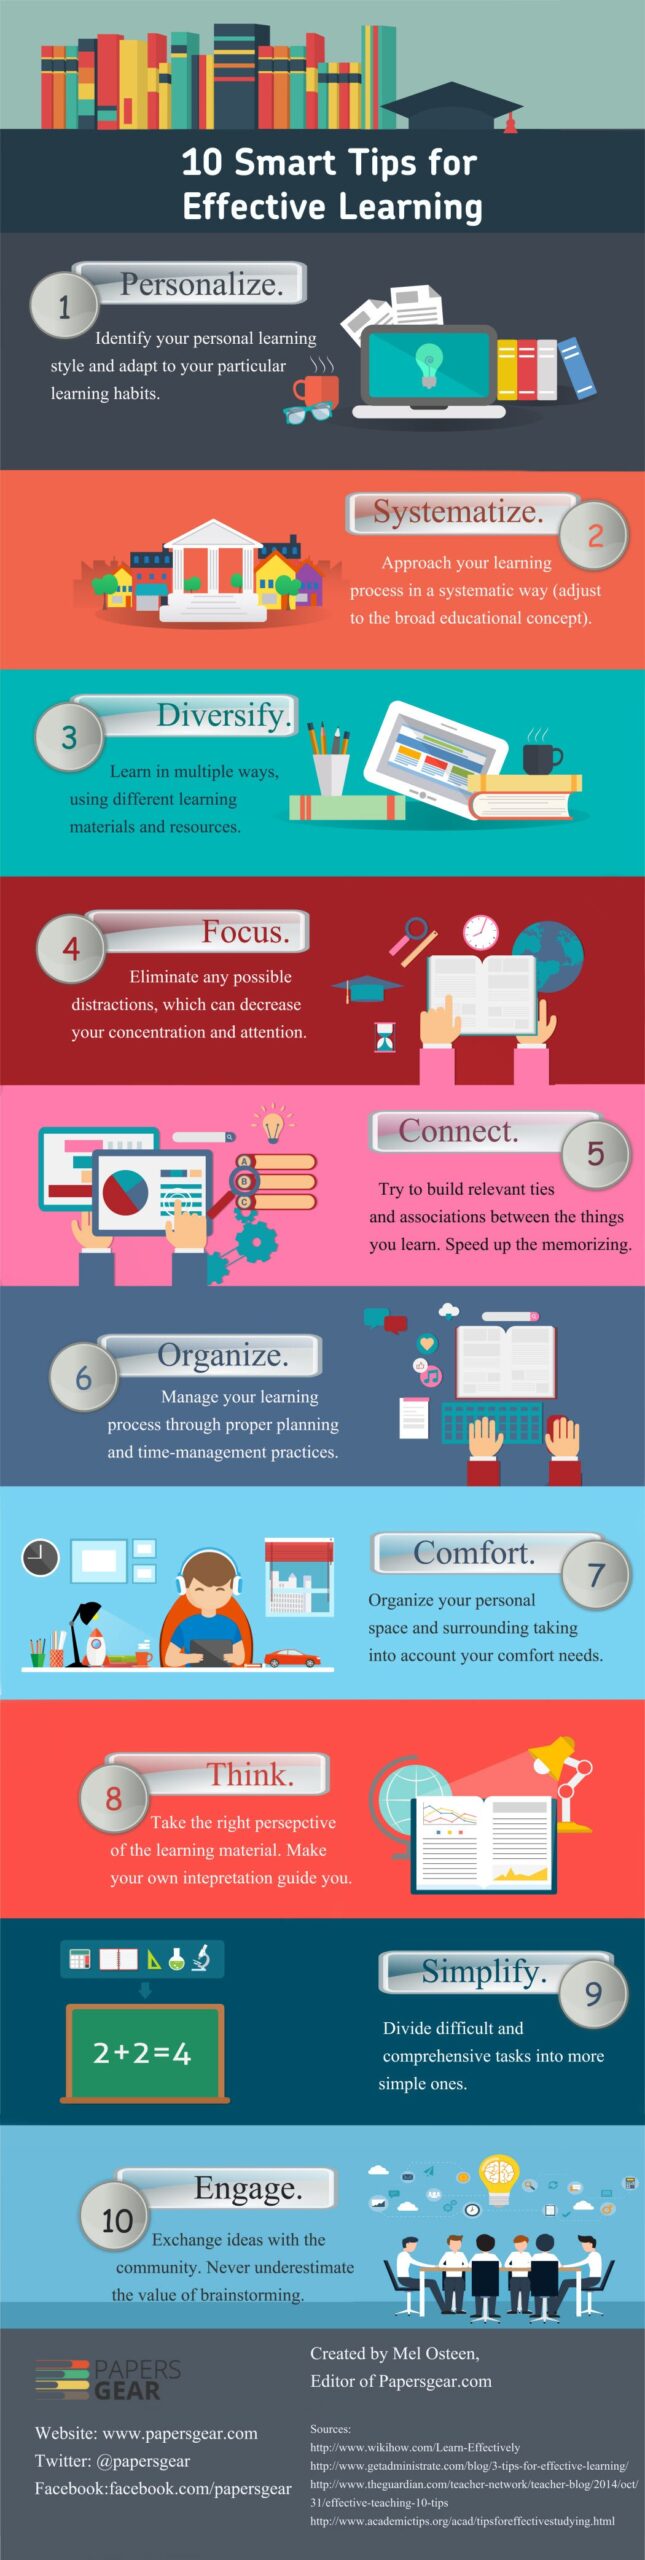 5 Tips For Content Marketers [INFOGRAPHIC] - Venngage